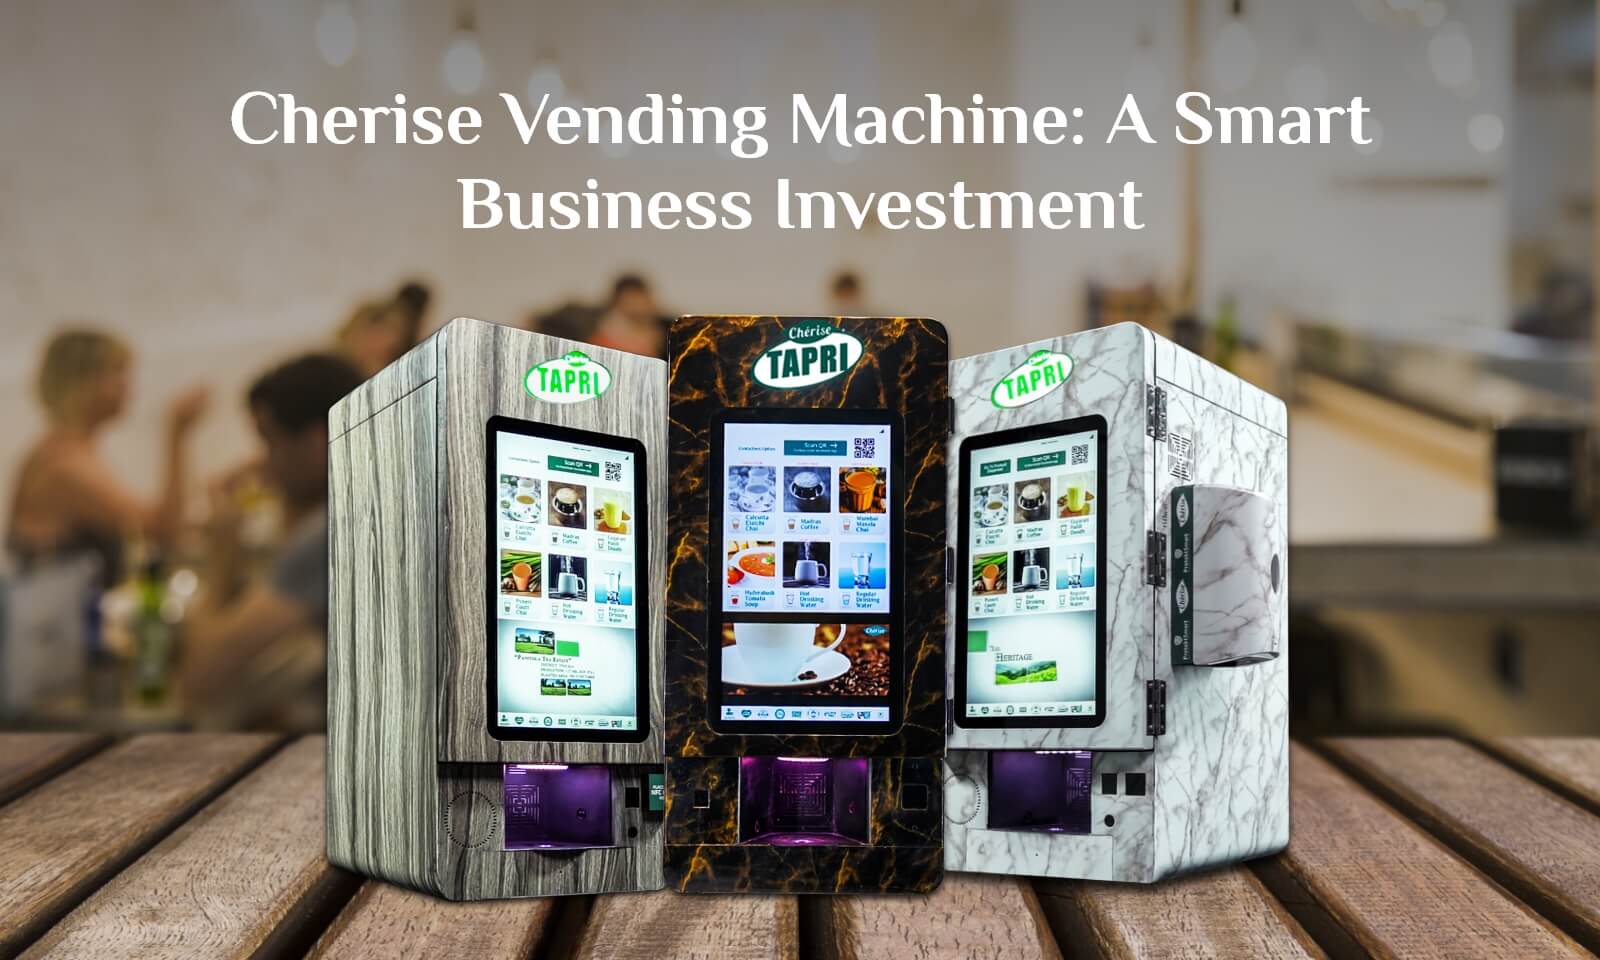 5 Reasons to Install Cherise Tea Vending Machine in Your Business